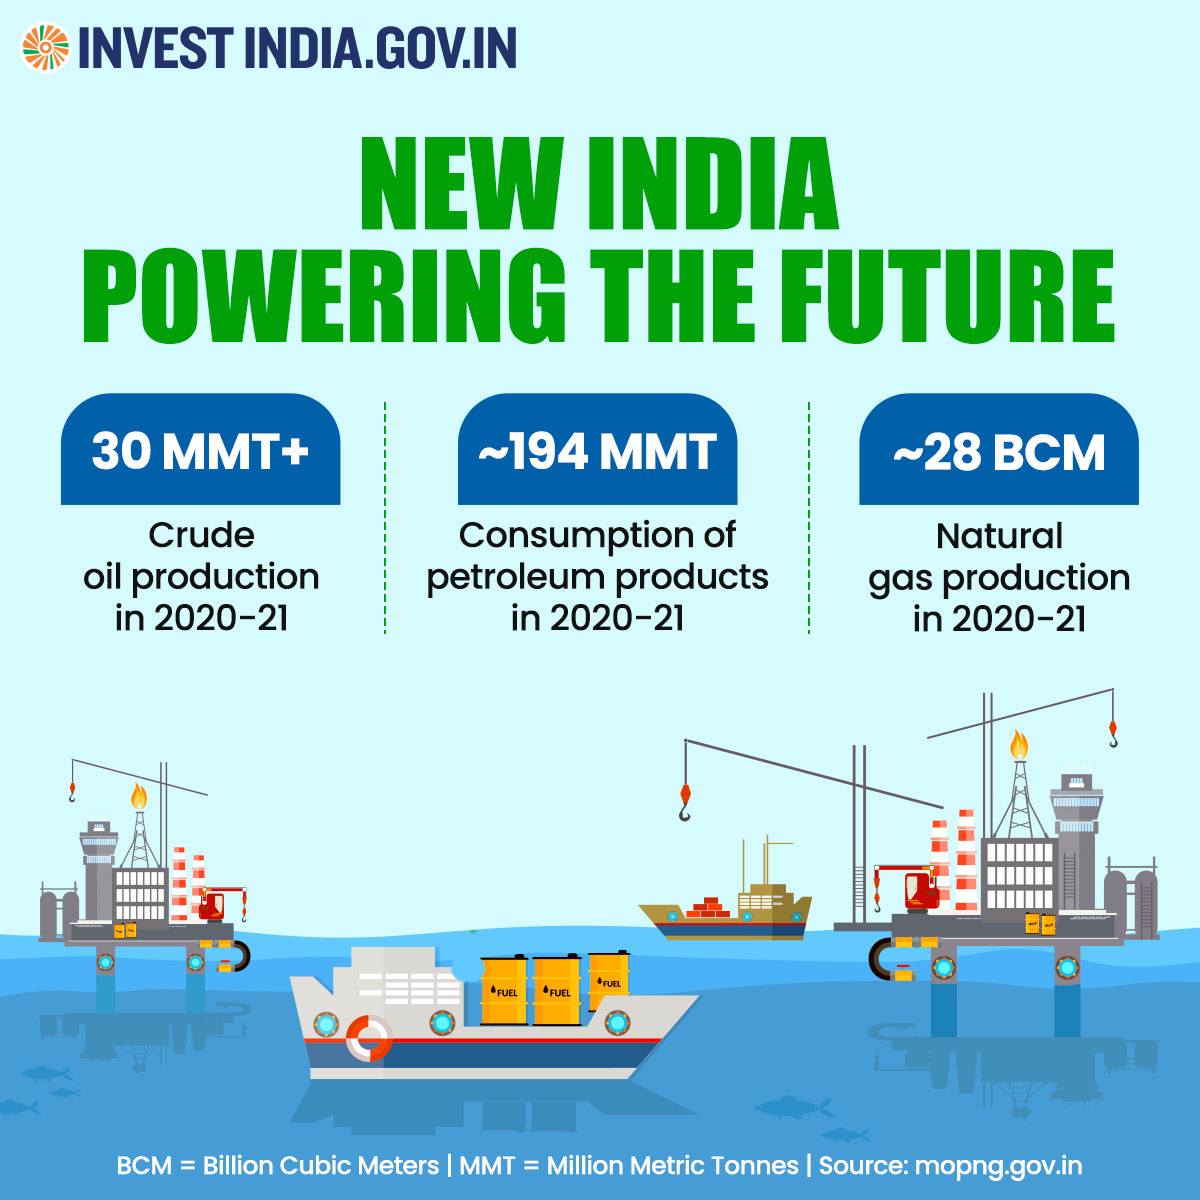 #InvestInIndia

#NewIndia aims to raise the proportion of natural gas in its energy mix from 6% to 15% by 2025.

Know more: bit.ly/II-NaturalGas

#InvestIndia #CleanEnergyTransition #RenewableEnergy @EMBACHILEINDIA @ChileMFA @IndiaEmbBogota @EmbaMexInd @IndEmbMexico @SRE_mx